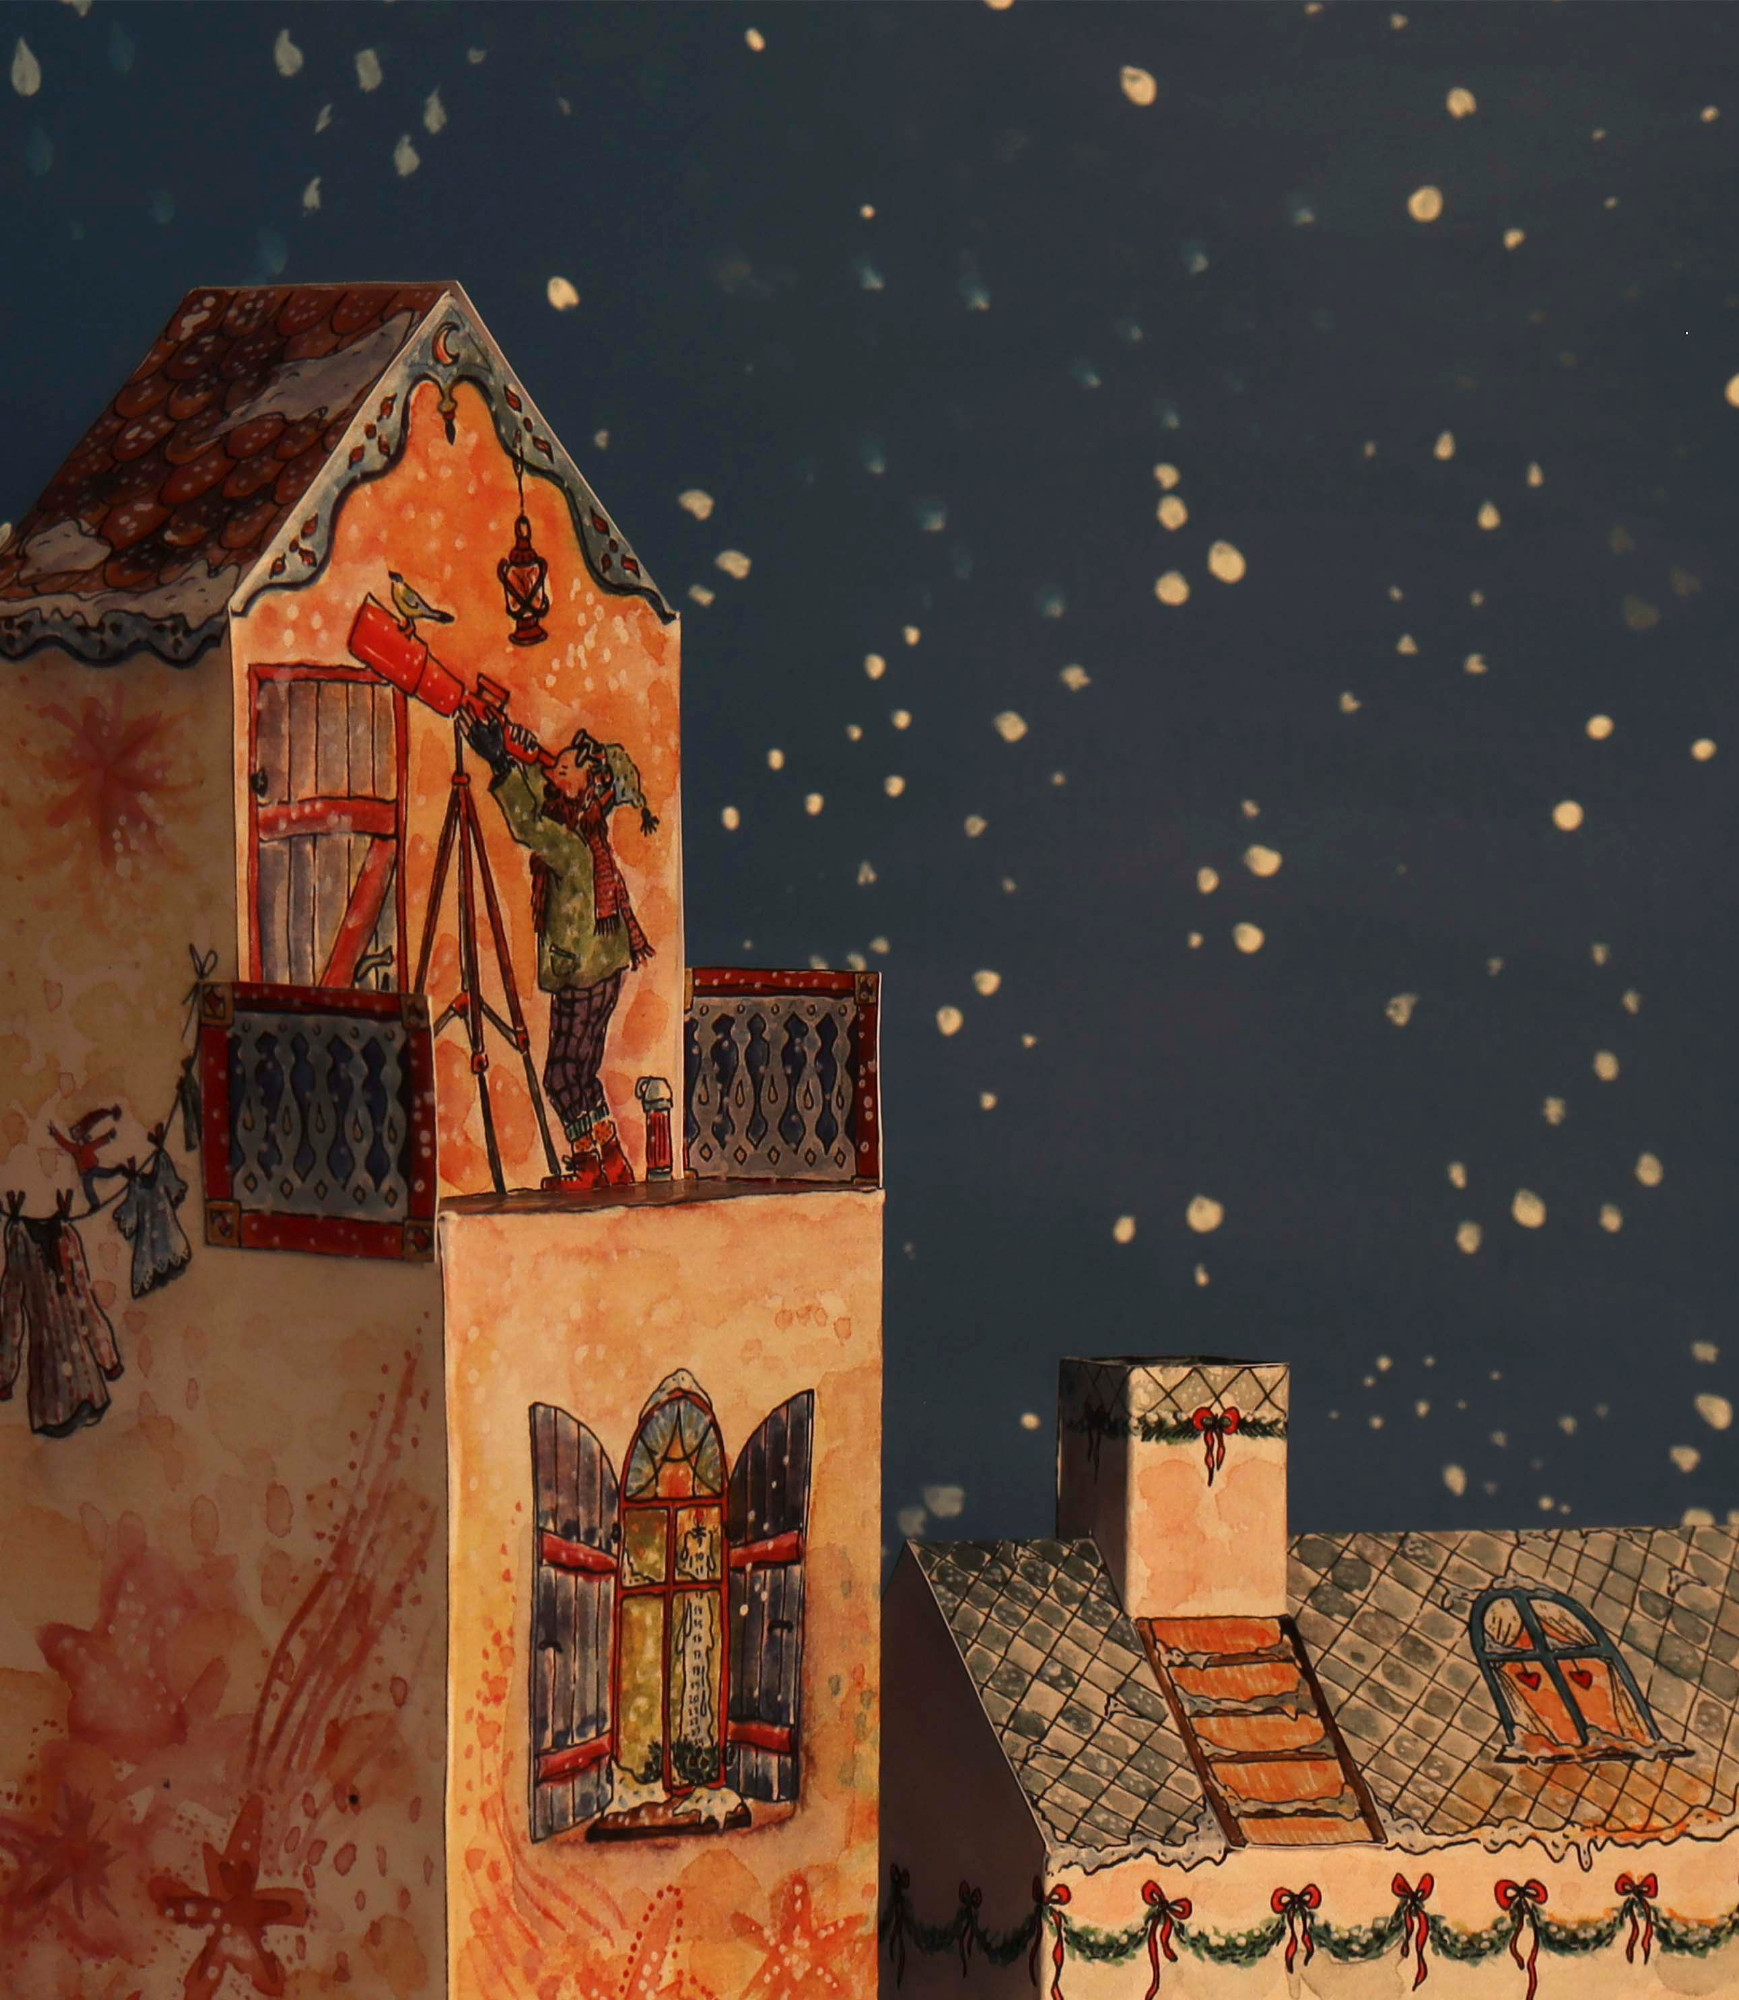 'Looking for the Christmas Star'. One of the projects in my final term is an advent calendar that contains 24 cut-out sheets which can be cut out and folded into a Christmas town. Everyday a little story will introduce the new piece of the town and link them all together.